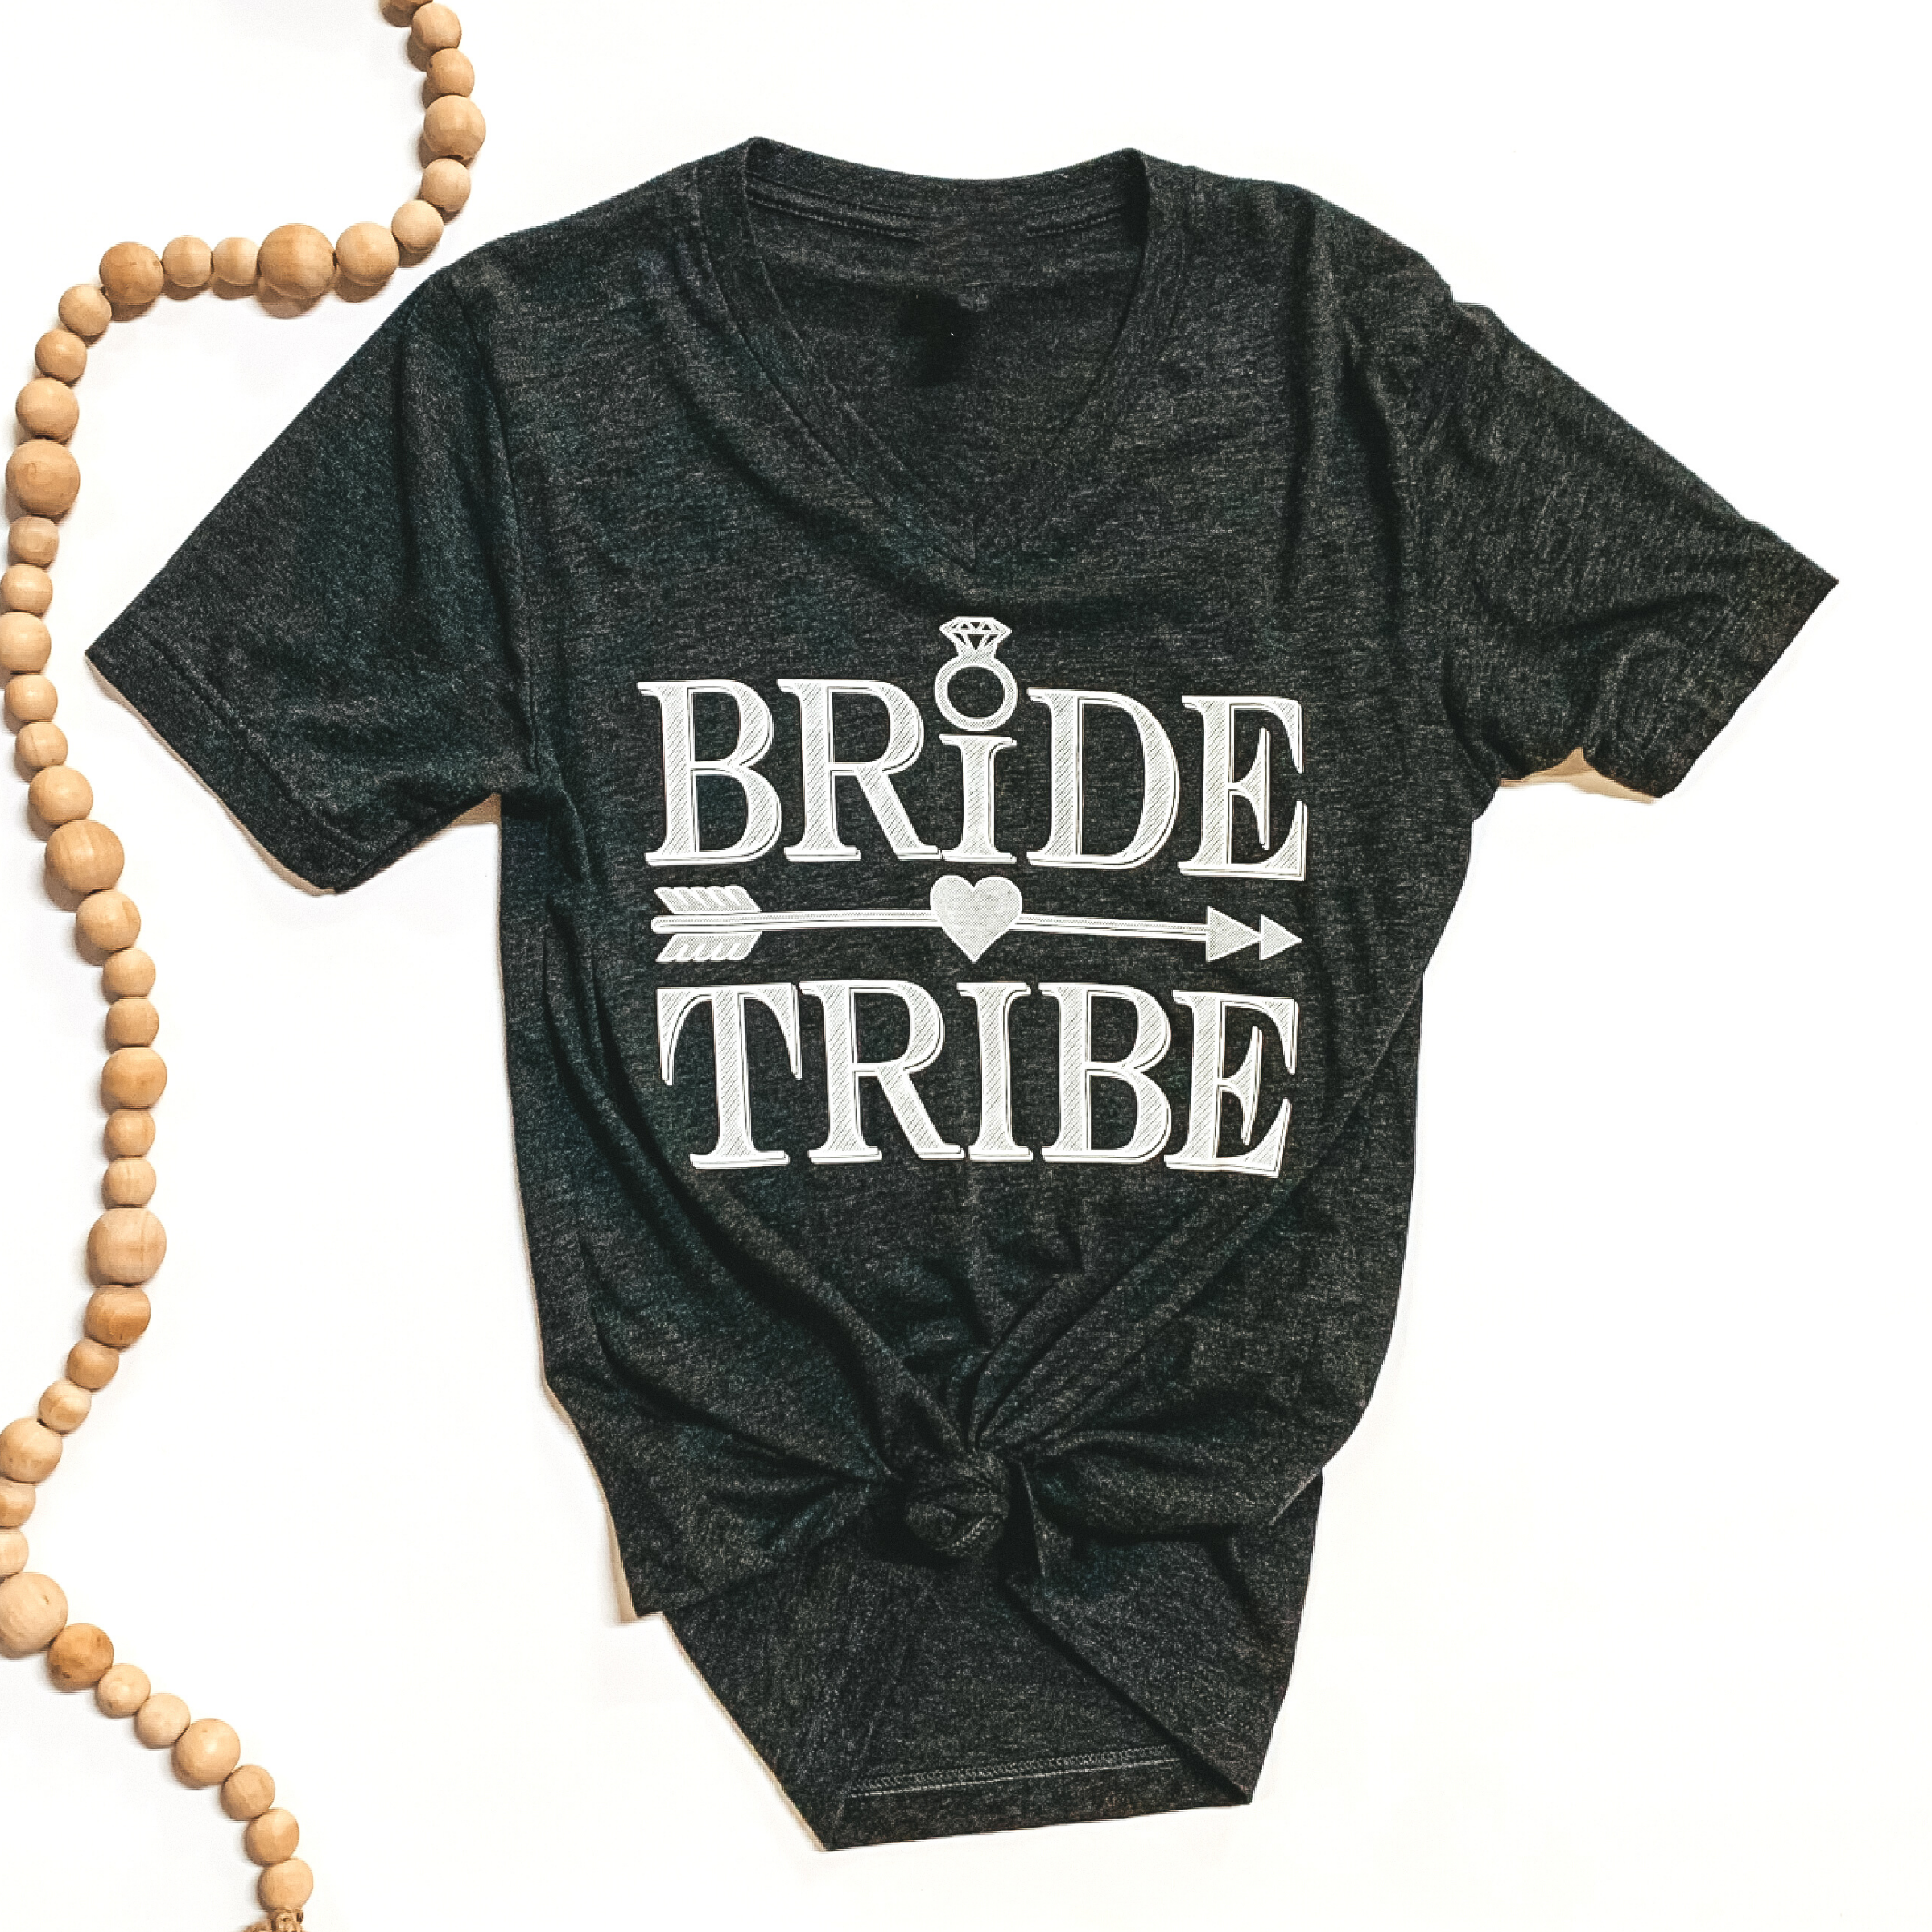 Last Chance Size Small | Bride Tribe Tee in Black - Giddy Up Glamour Boutique